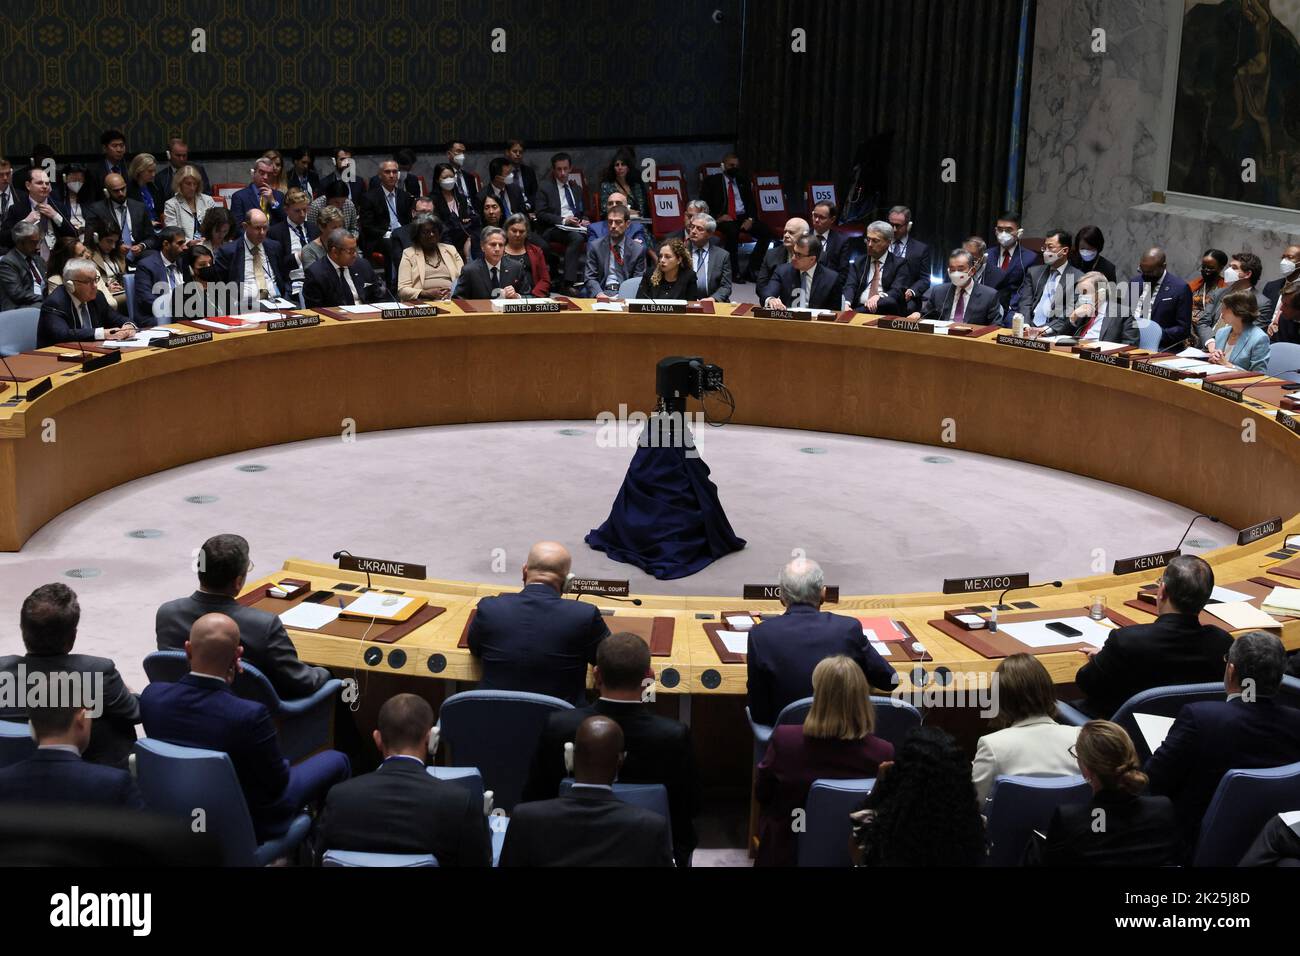 A general view during a high level meeting of the United Nations Security Council on the situation amid Russia's invasion of Ukraine, at the 77th Session of the United Nations General Assembly at U.N. Headquarters in New York City, U.S., September 22, 2022. REUTERS/Brendan McDermid Stock Photo